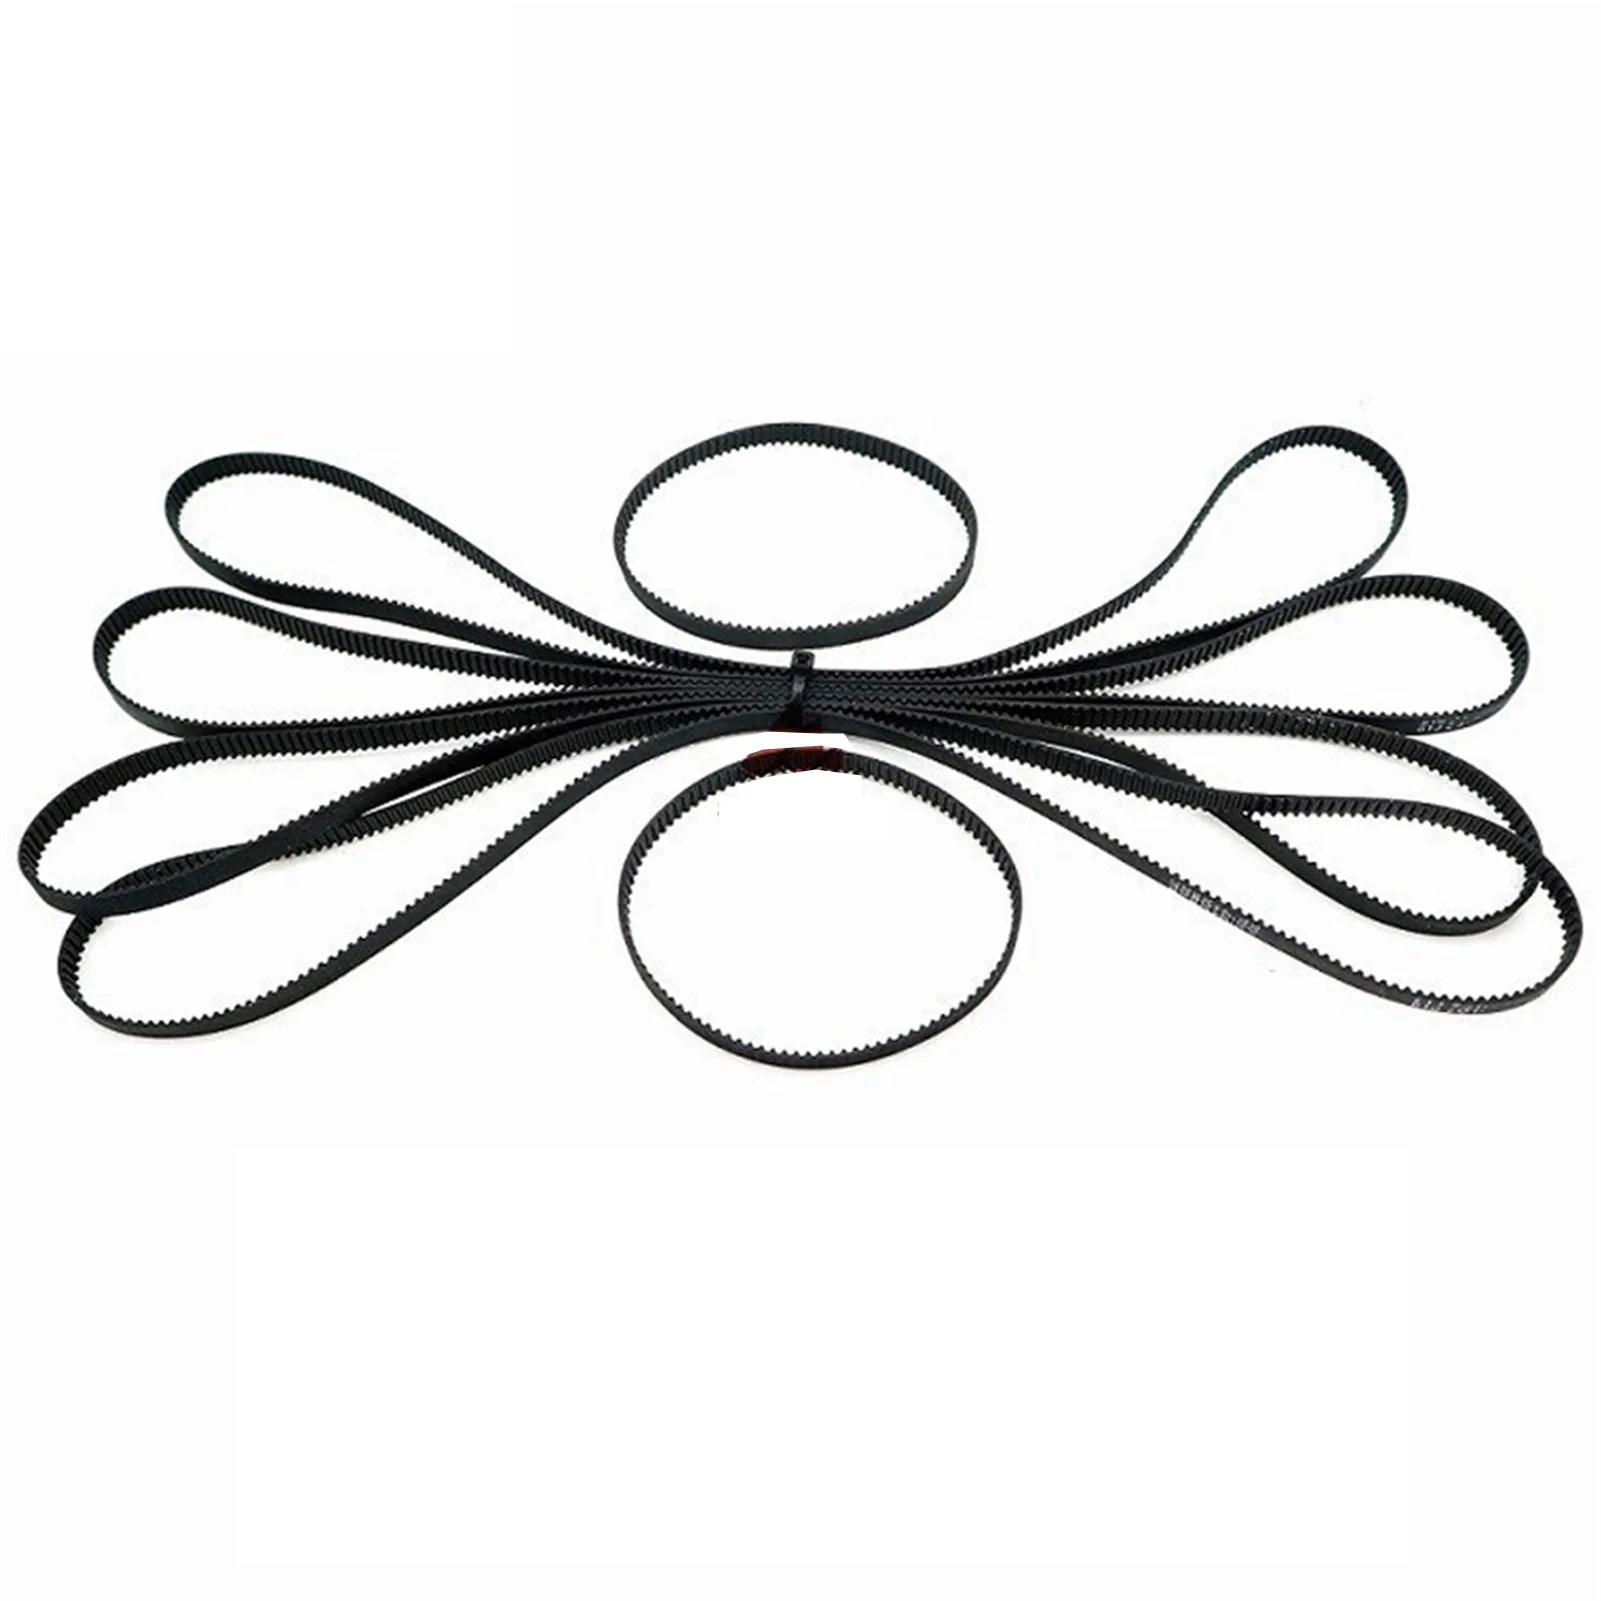 

GT2 Closed Loop Timing Belt Rubber 2GT, 6mm 152/154/156/158/160/162/164/166/168/170/172/174/176 178mm, Synchronous, 3D Printer